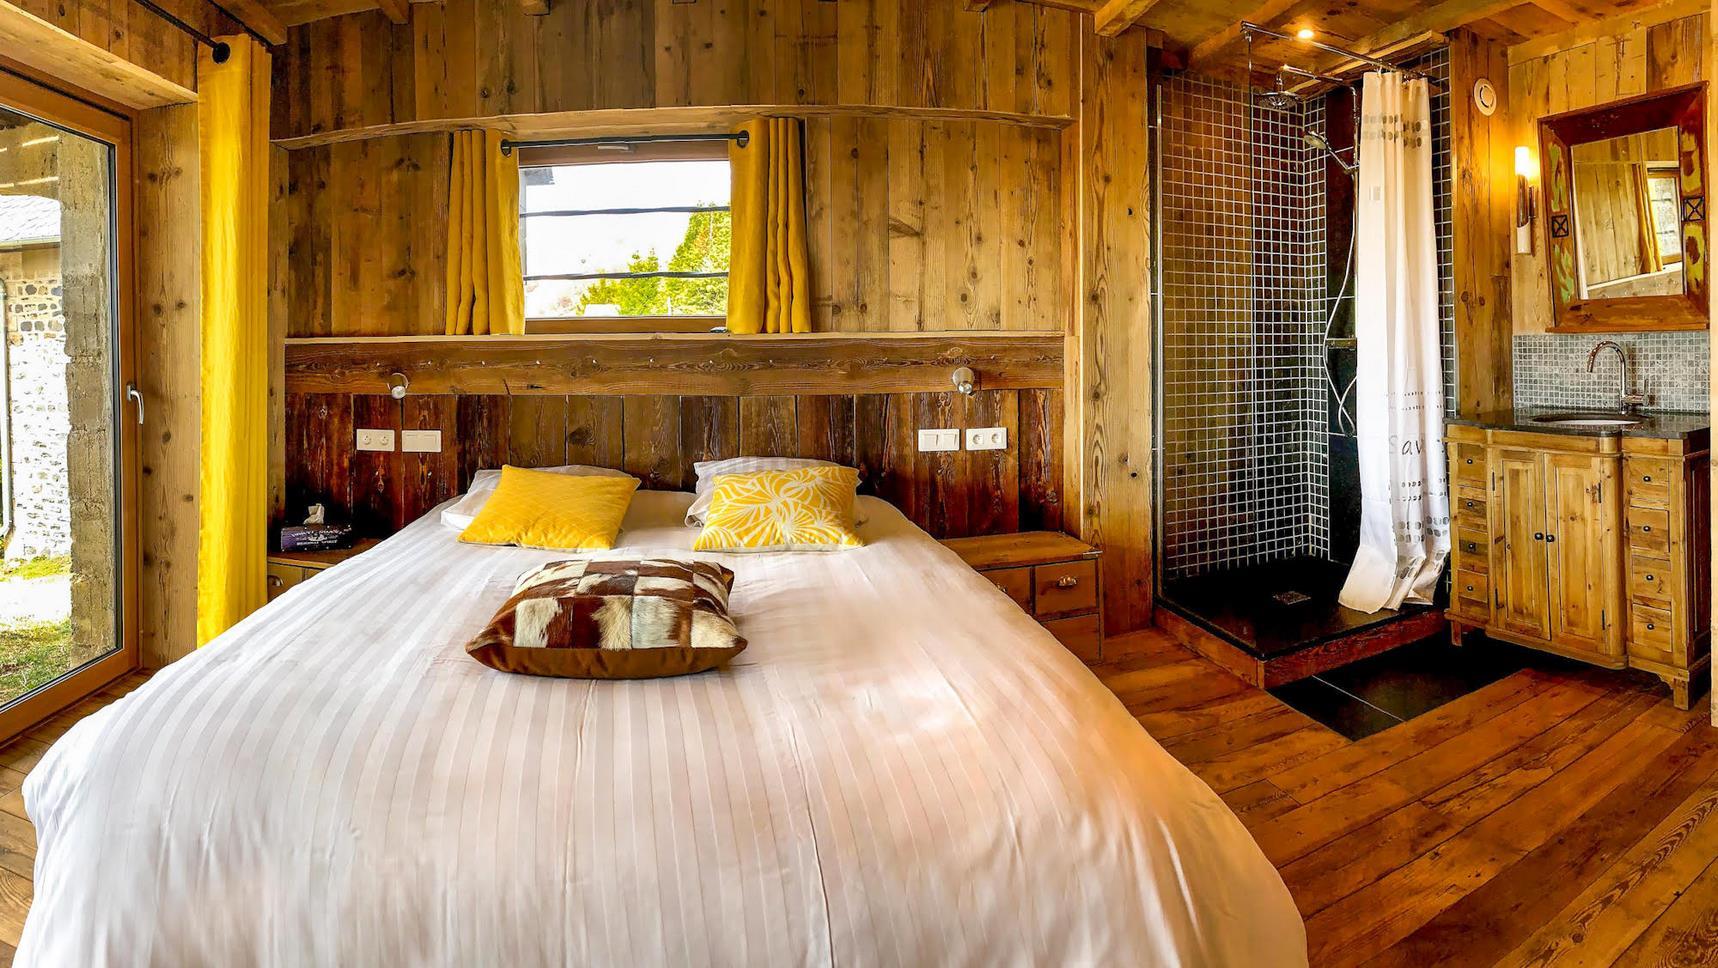 Chalet in Super Besse l'Anorak, discover the suite La Cascade on the ground floor and its magnificent view